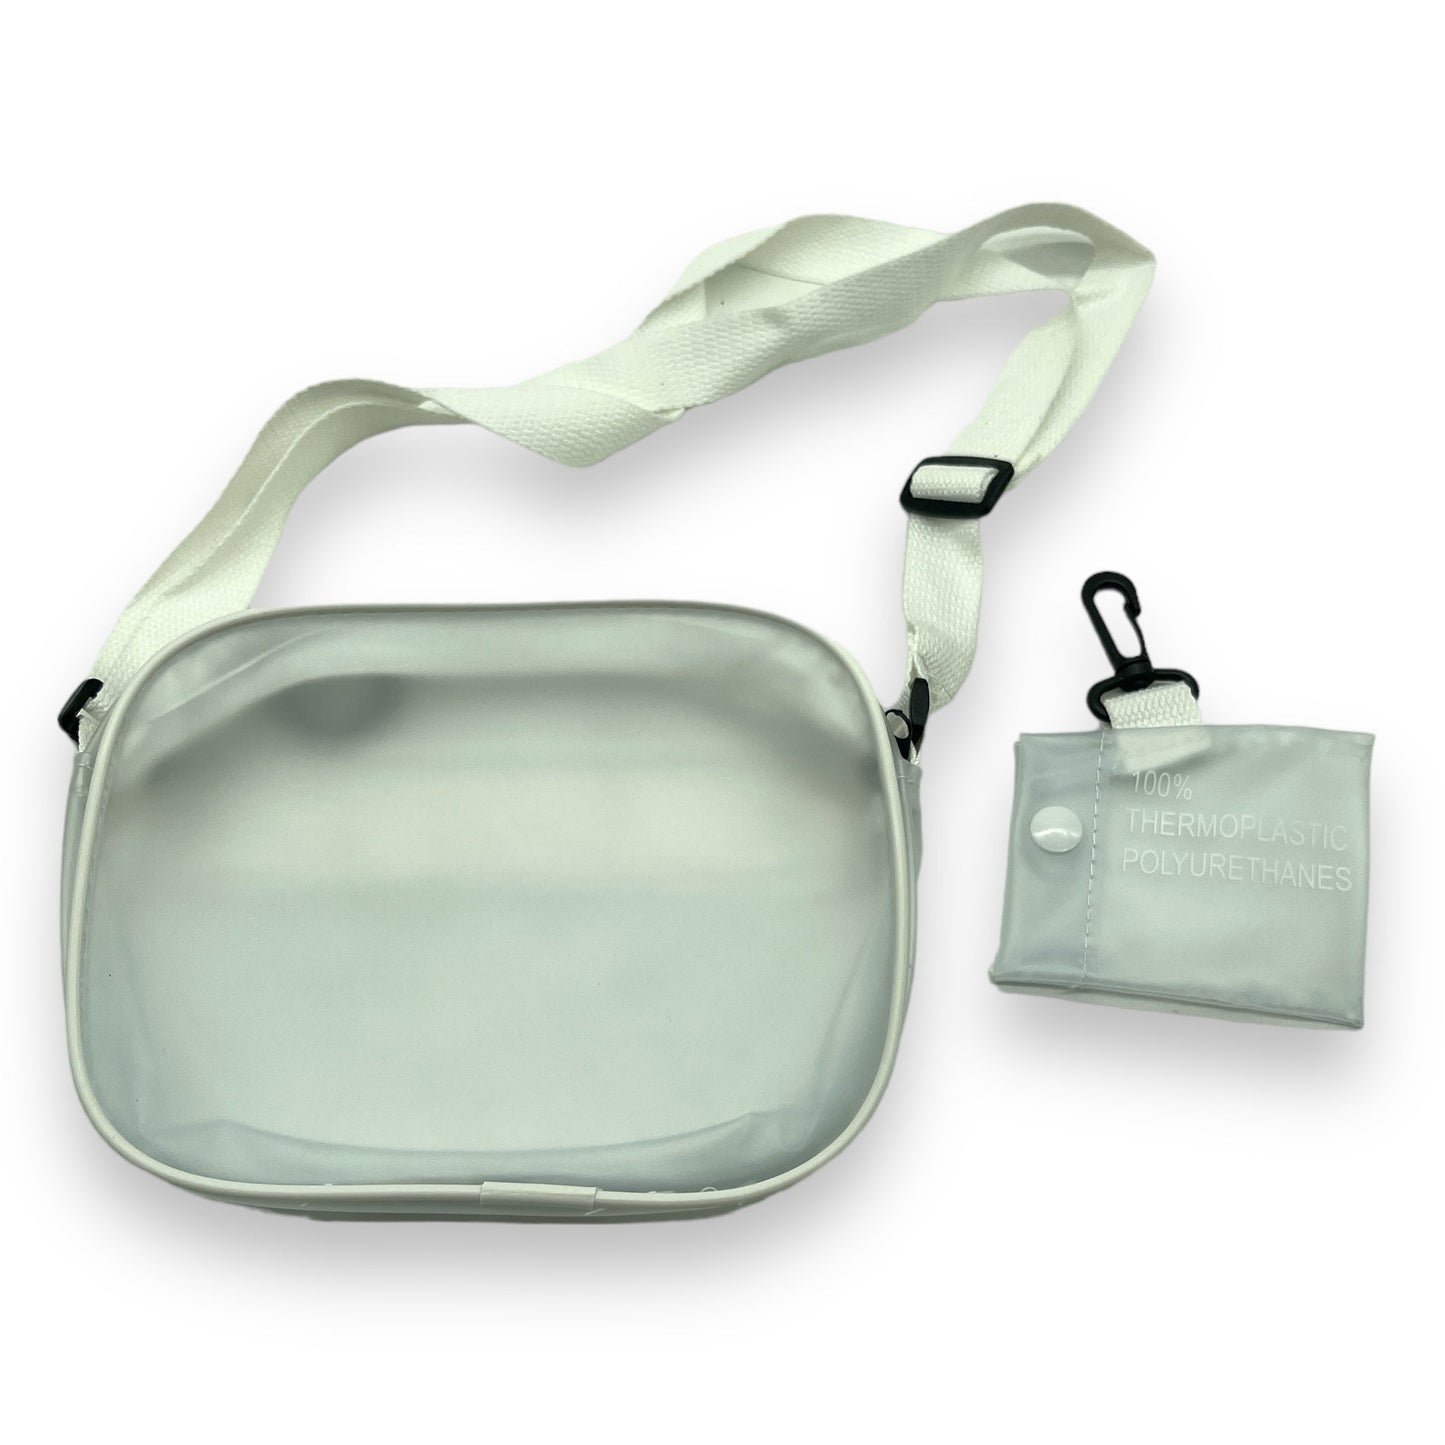 Small Clear Festival Bag - Stay Stylishly Organized at Any Event